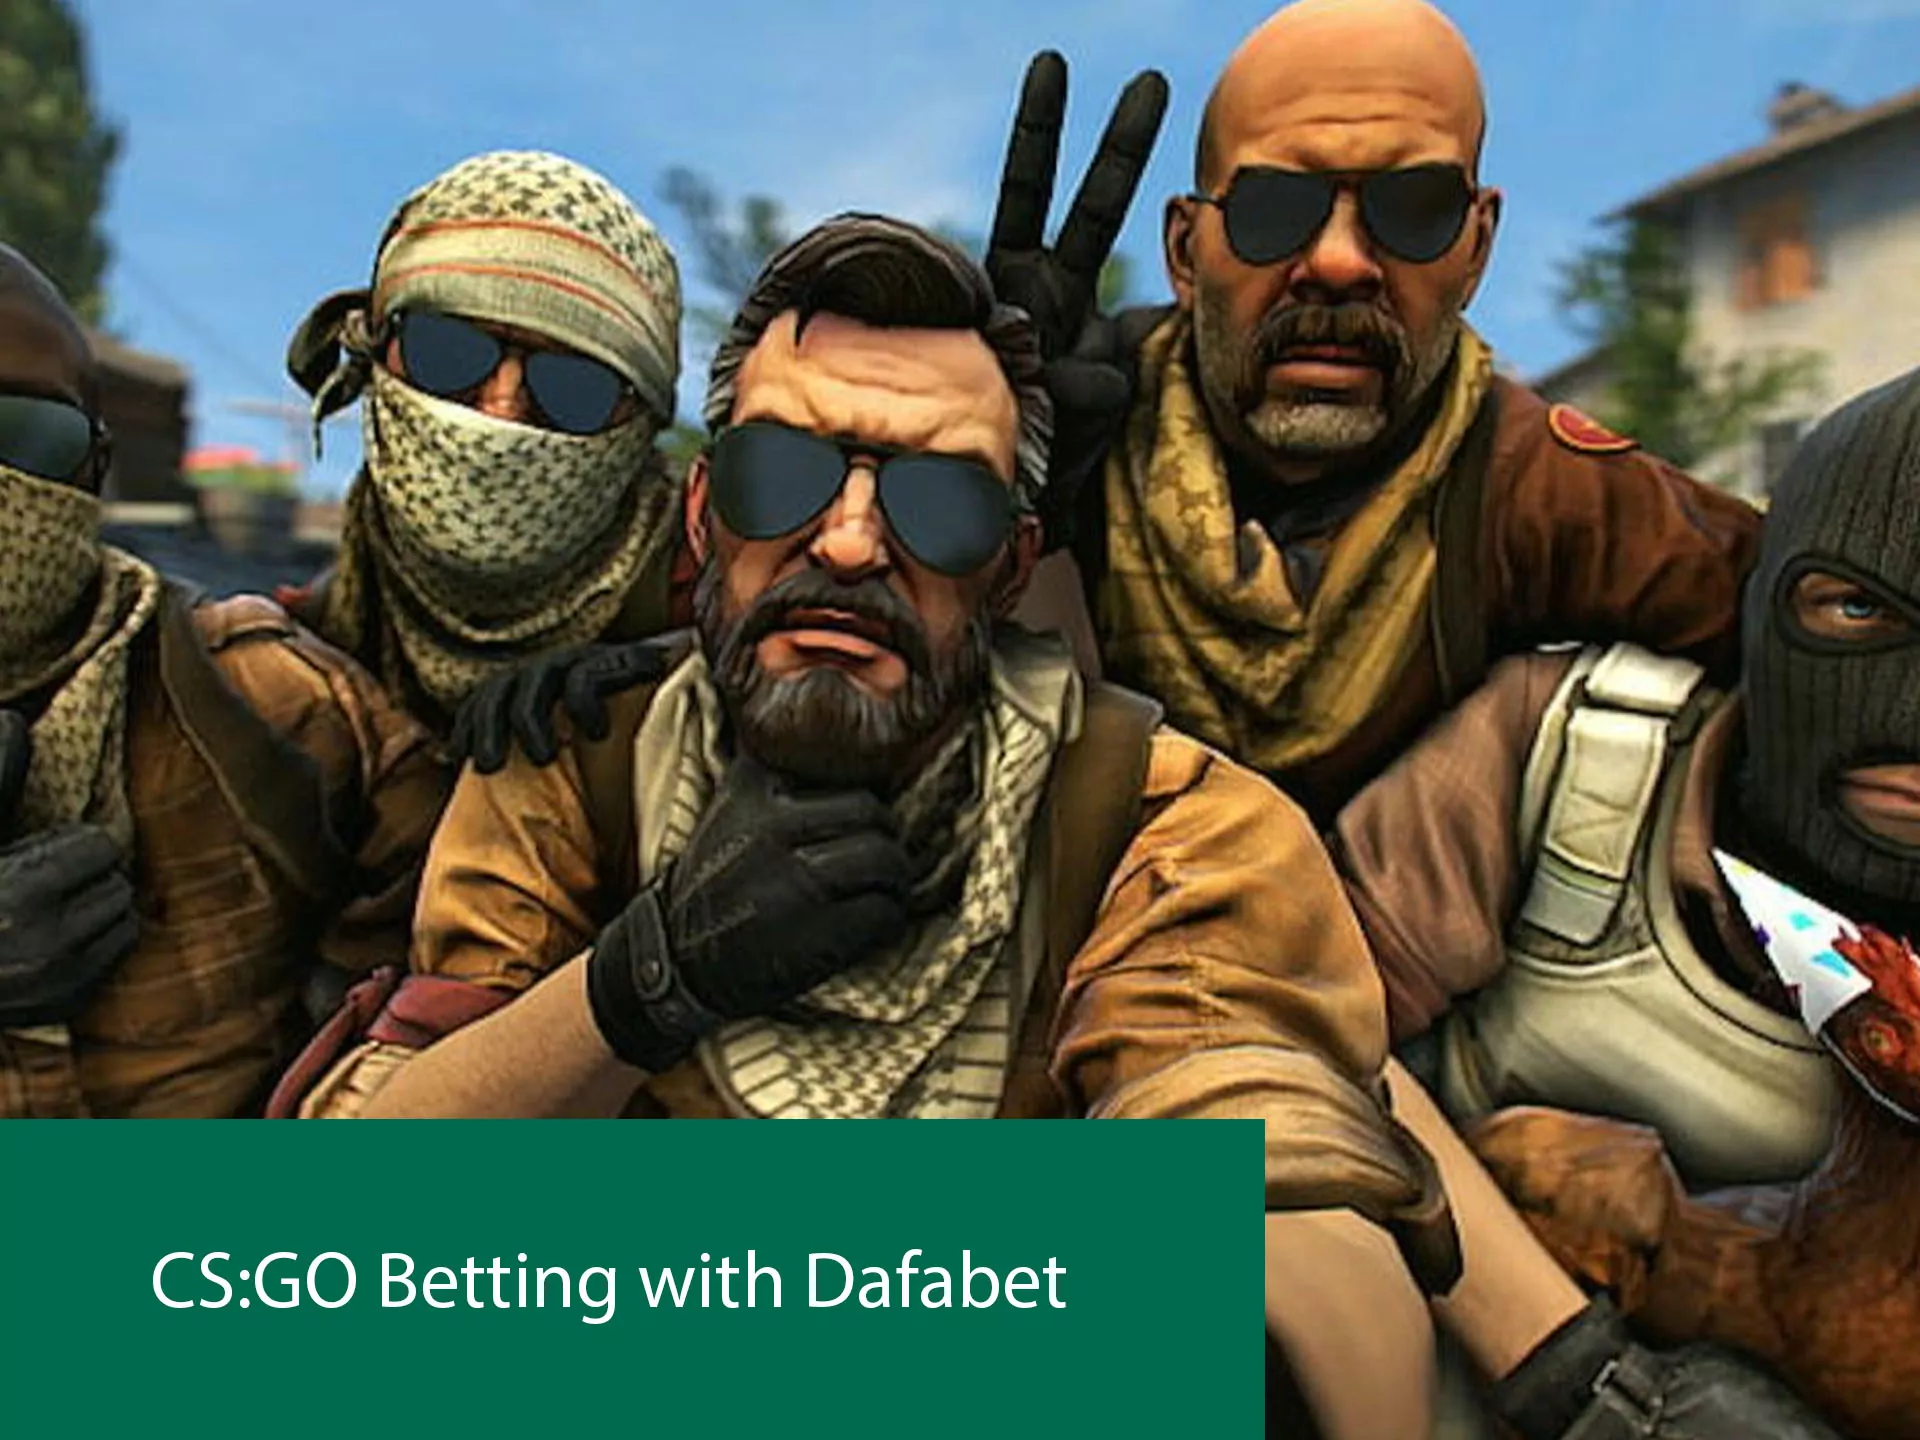 The selection of CS GO events are wide at Dafabet.